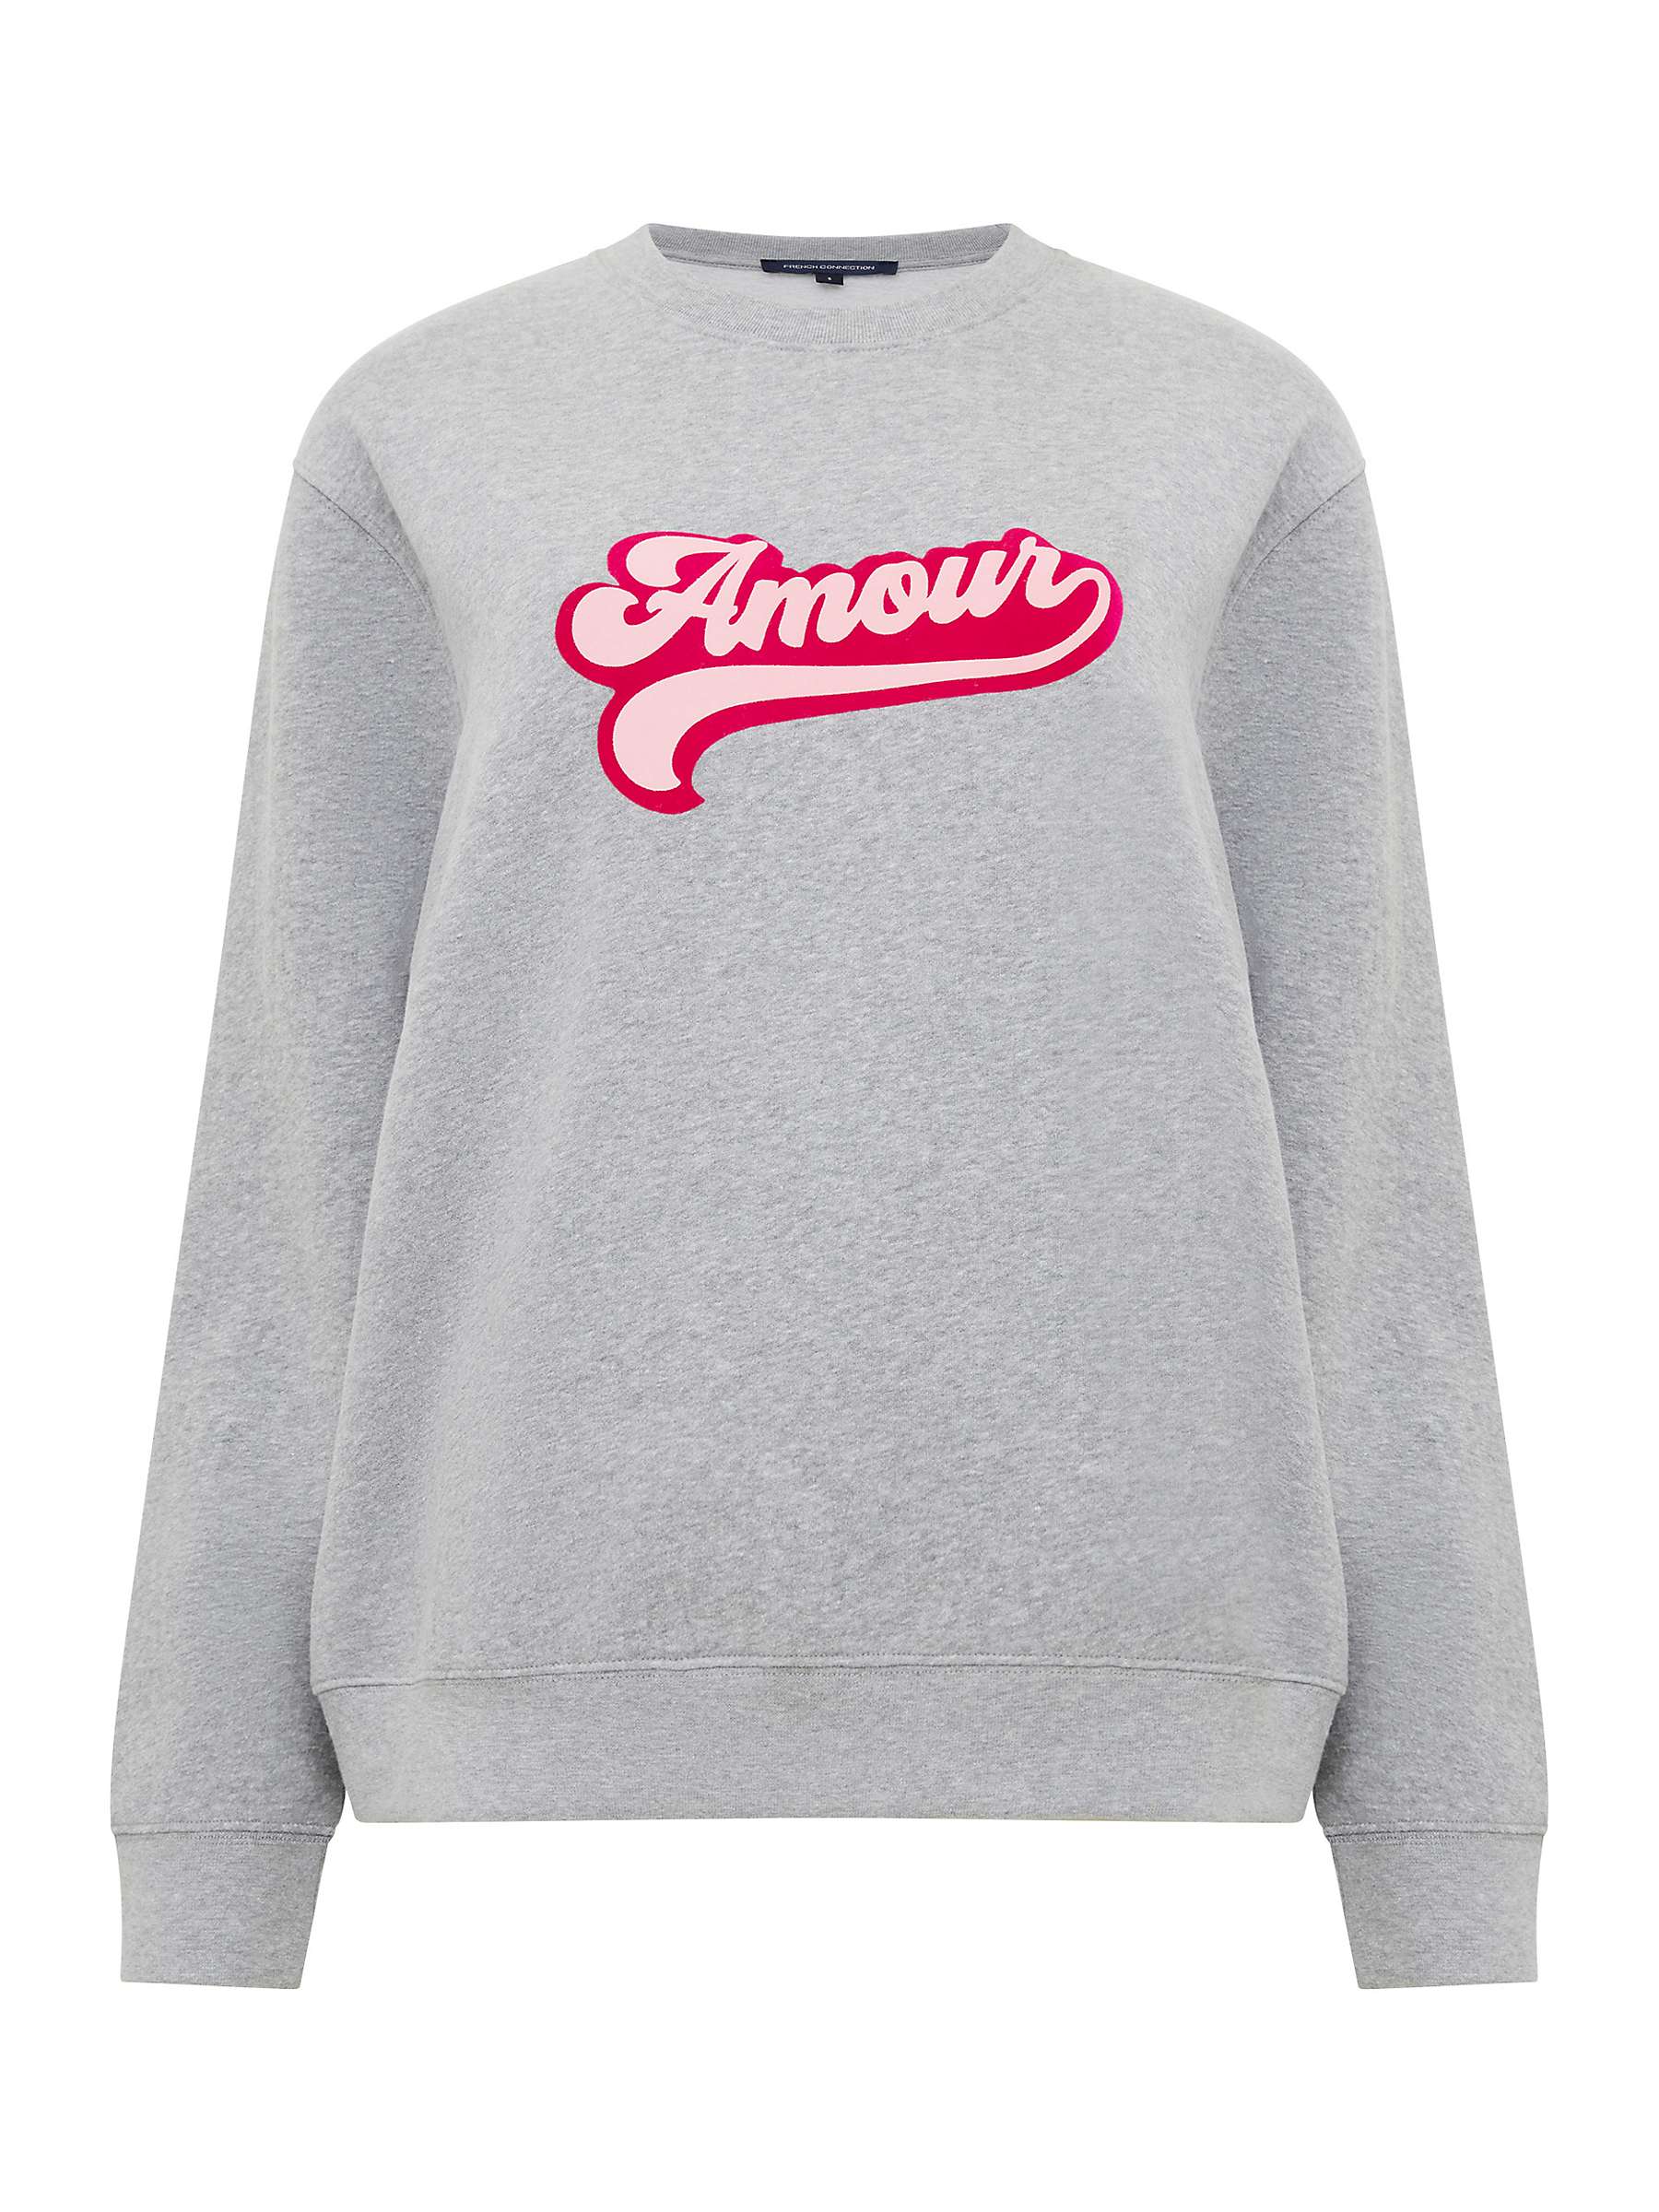 Buy French Connection Amour Graphic Sweatshirt, Light Grey Melange Online at johnlewis.com